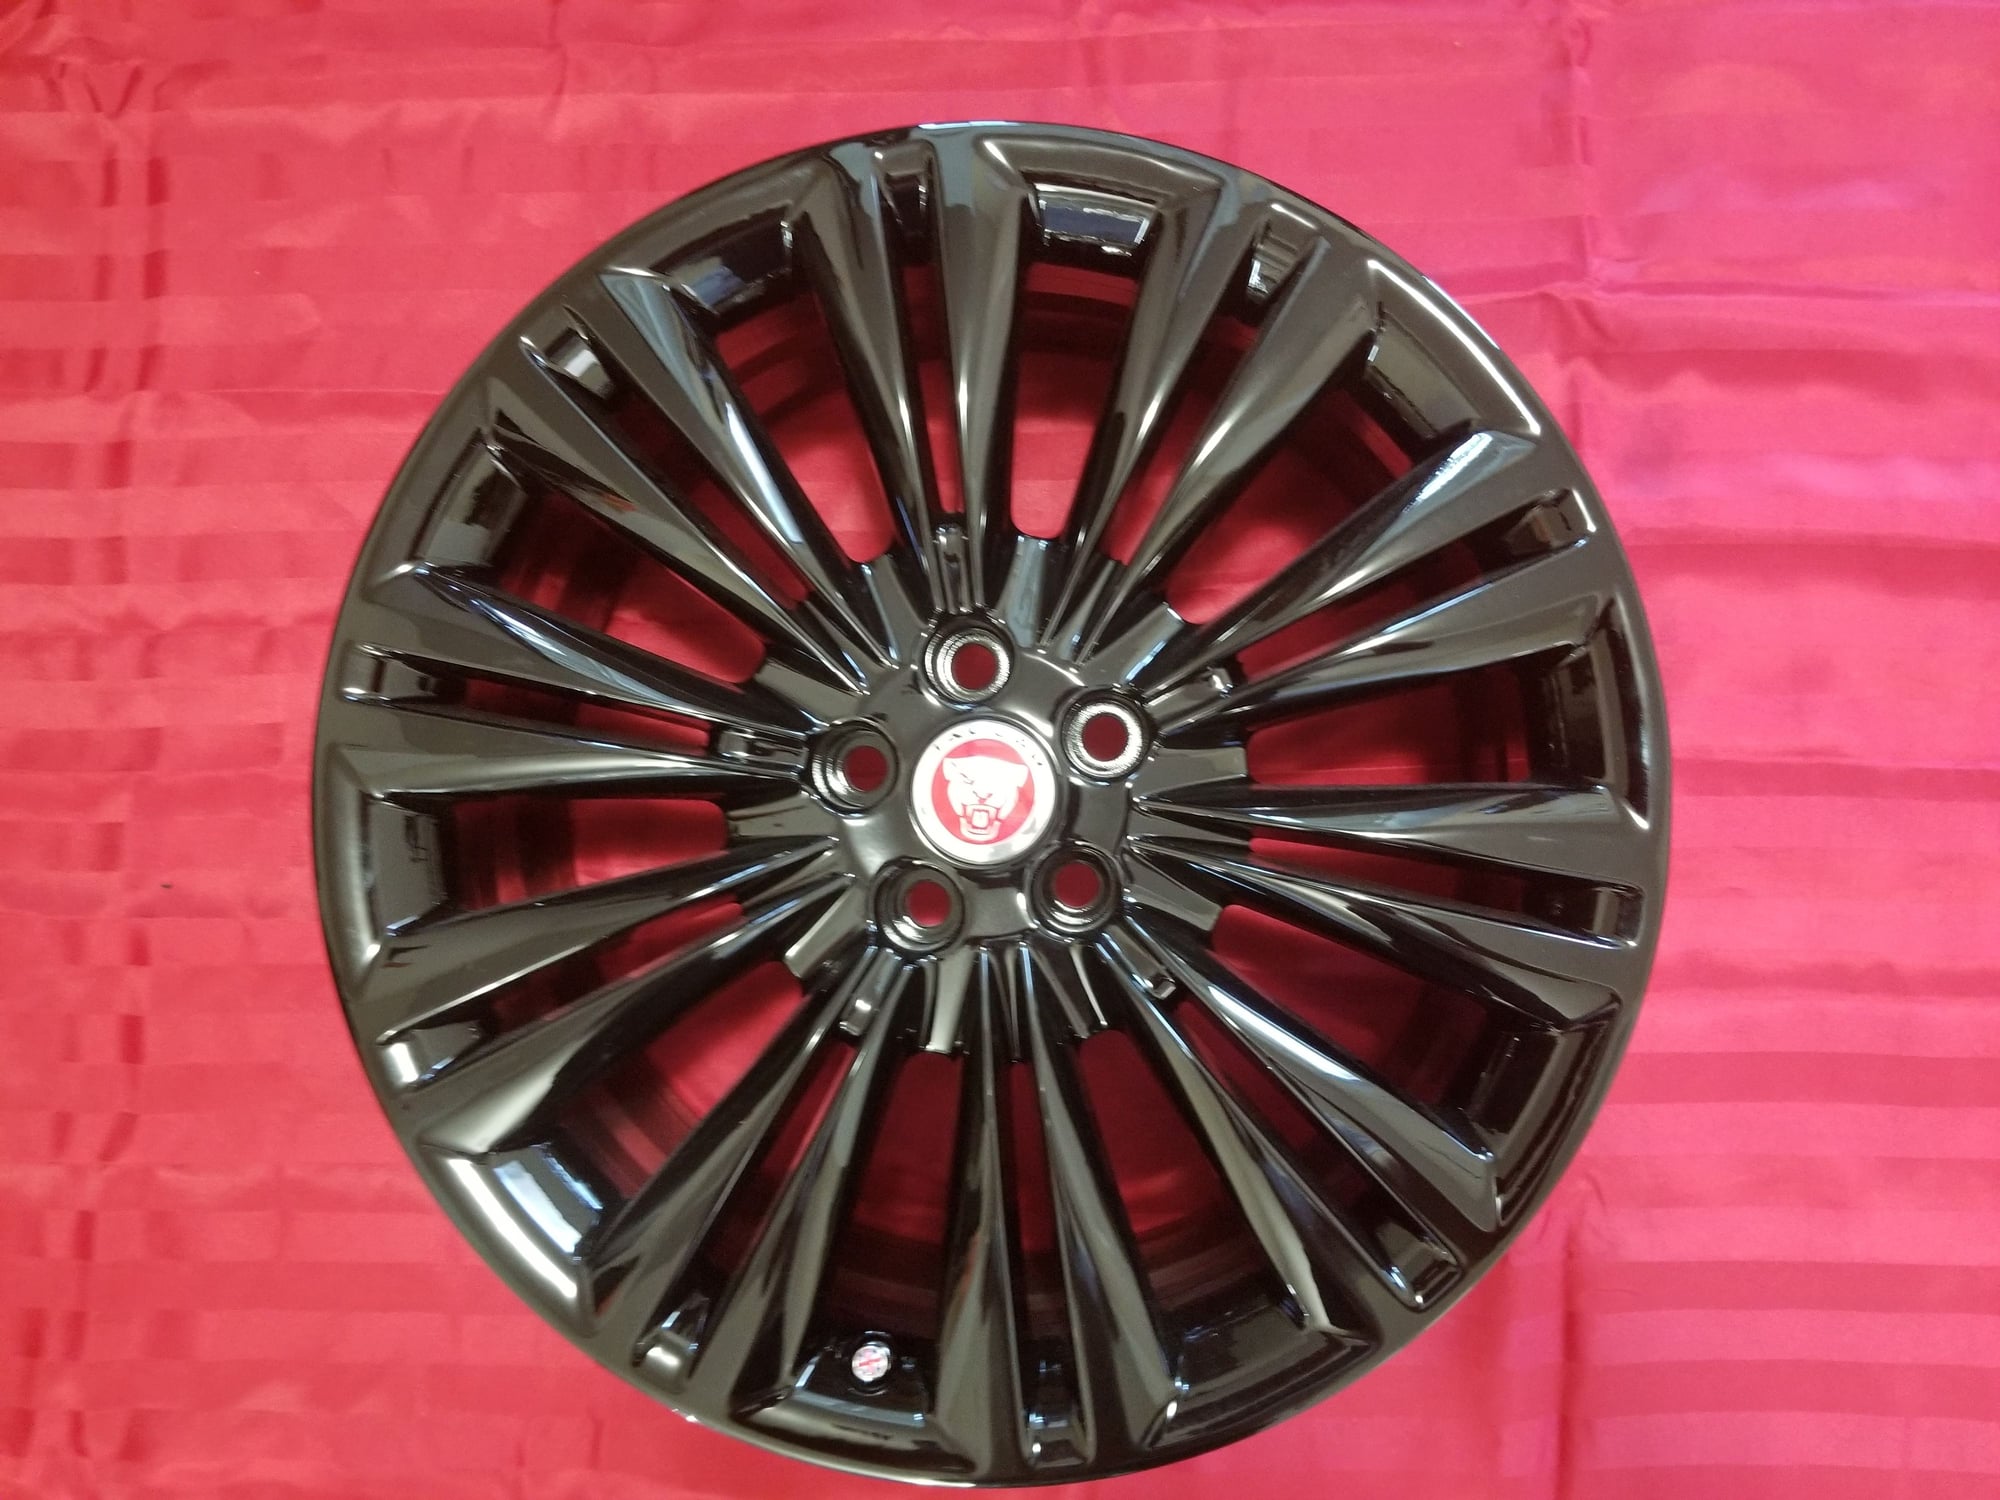 Wheels and Tires/Axles - Jaguar "Caravela" 19 Inch Rims - With TPMS Sensors - Canada Listing - New - Toronto, ON M4Y1R5, Canada